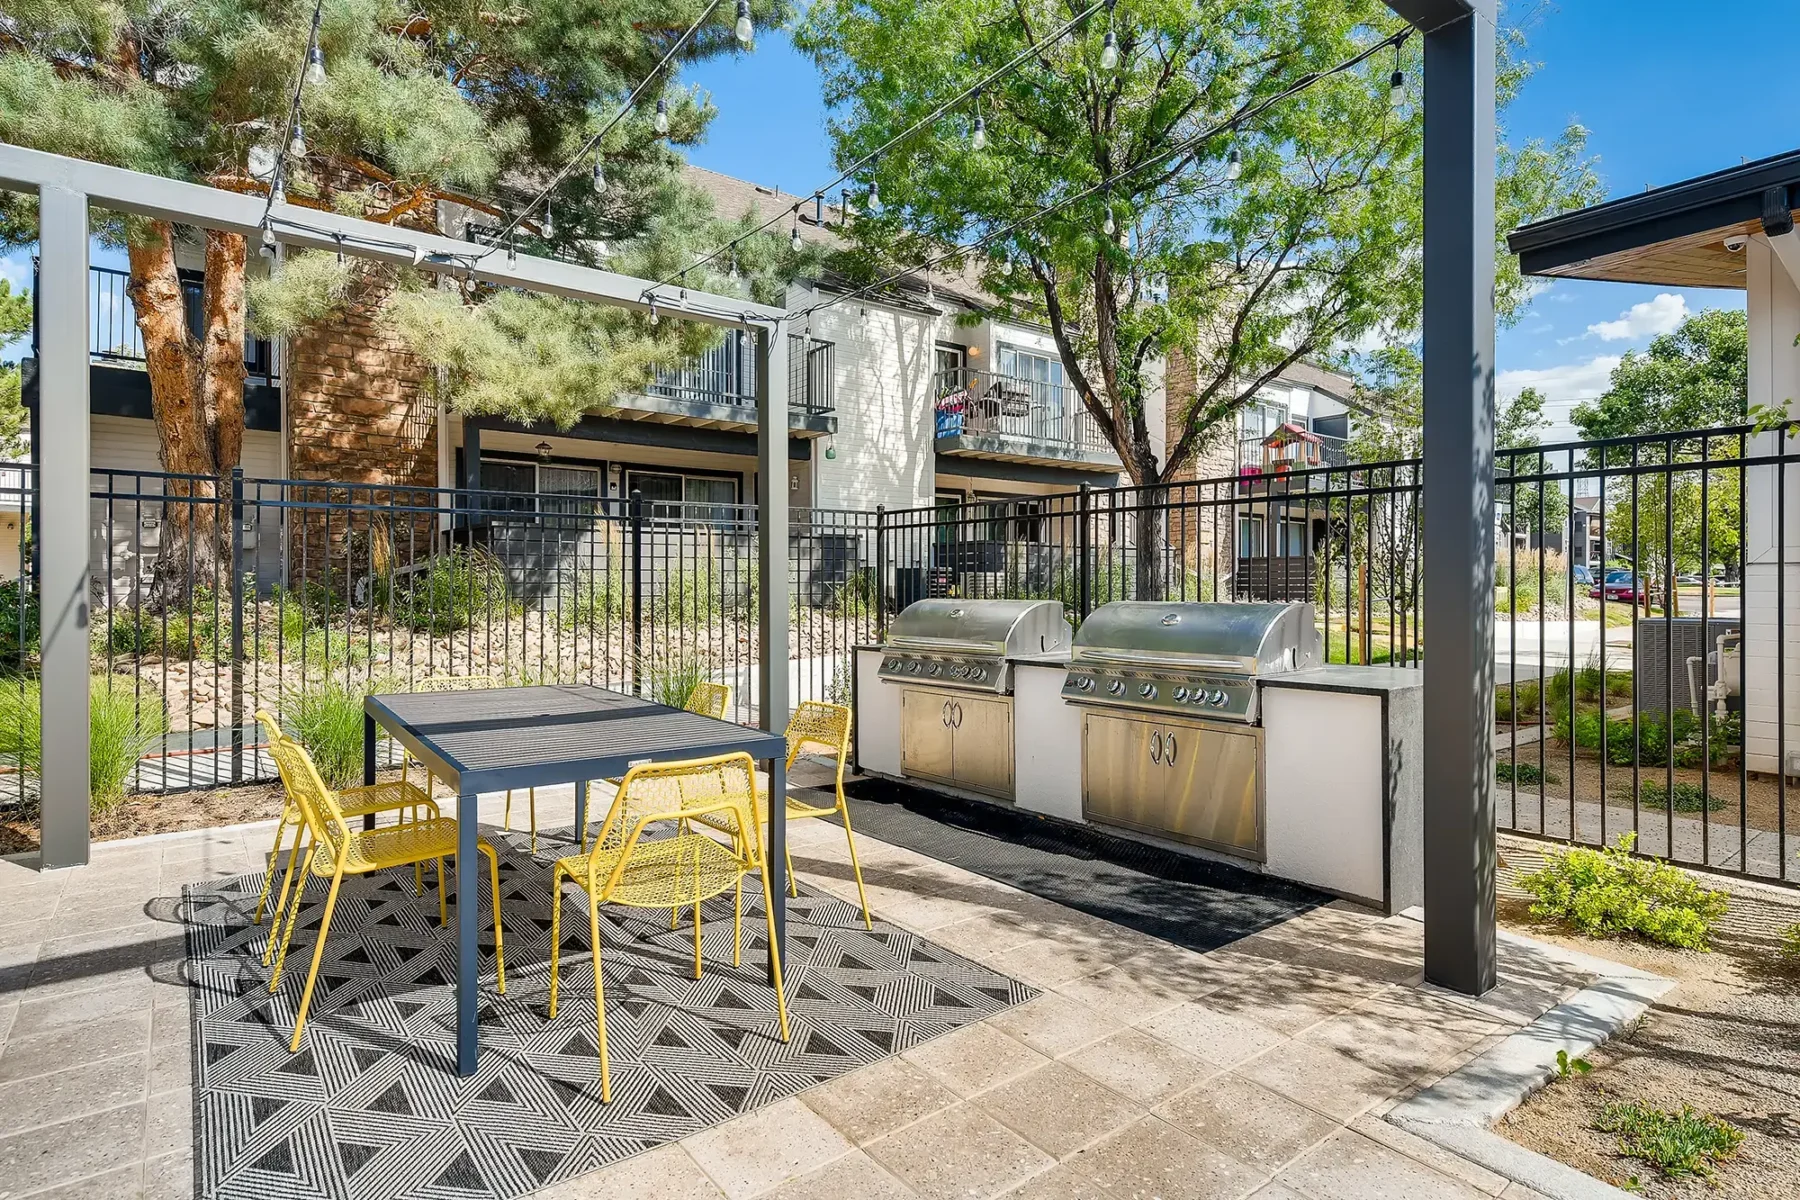 Outdoor grill area with tables